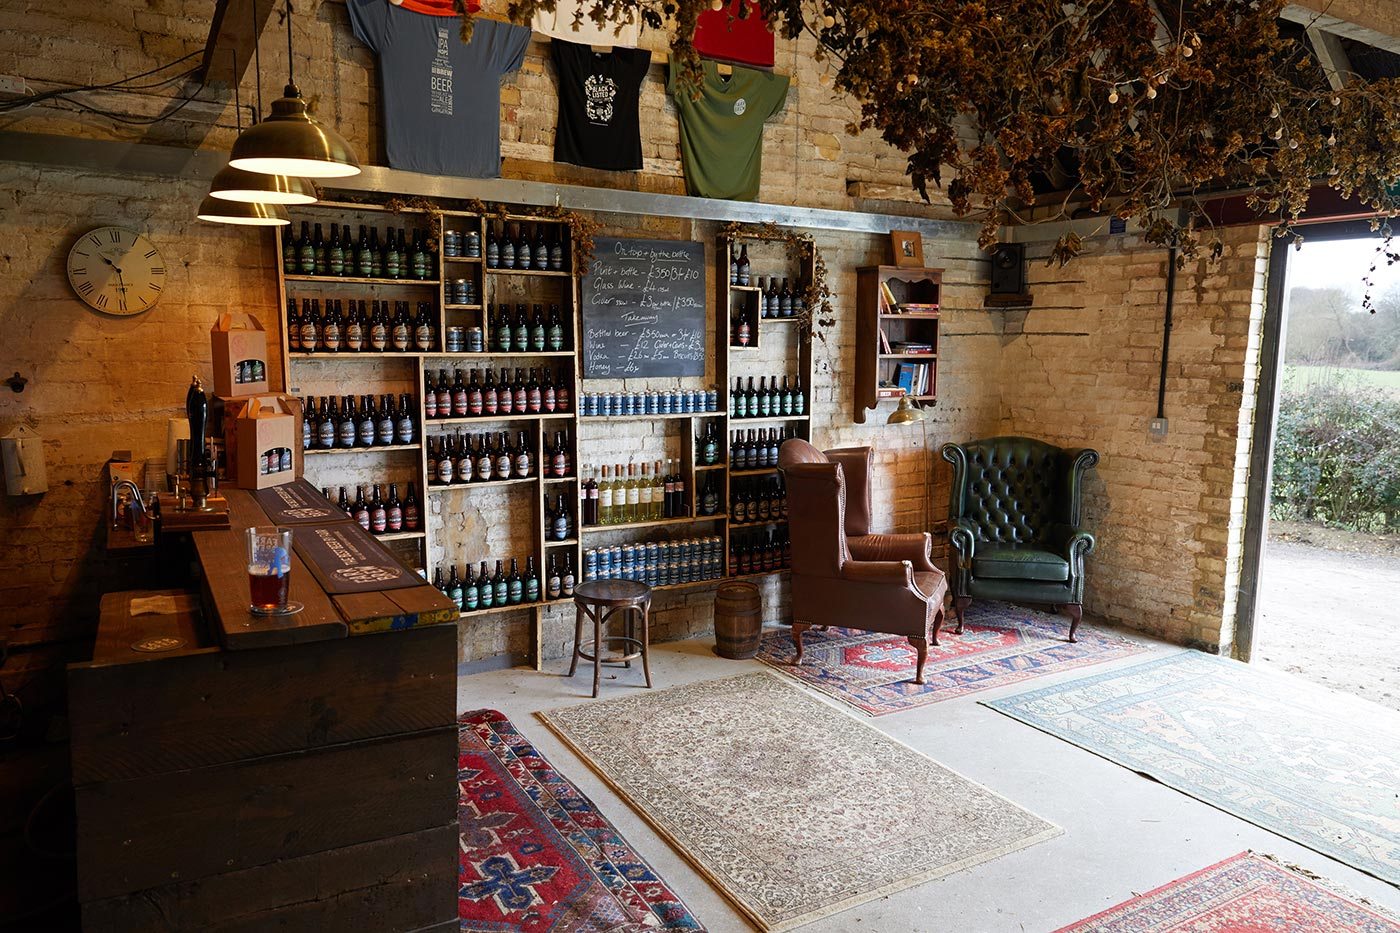 The Farr Brewery Interior